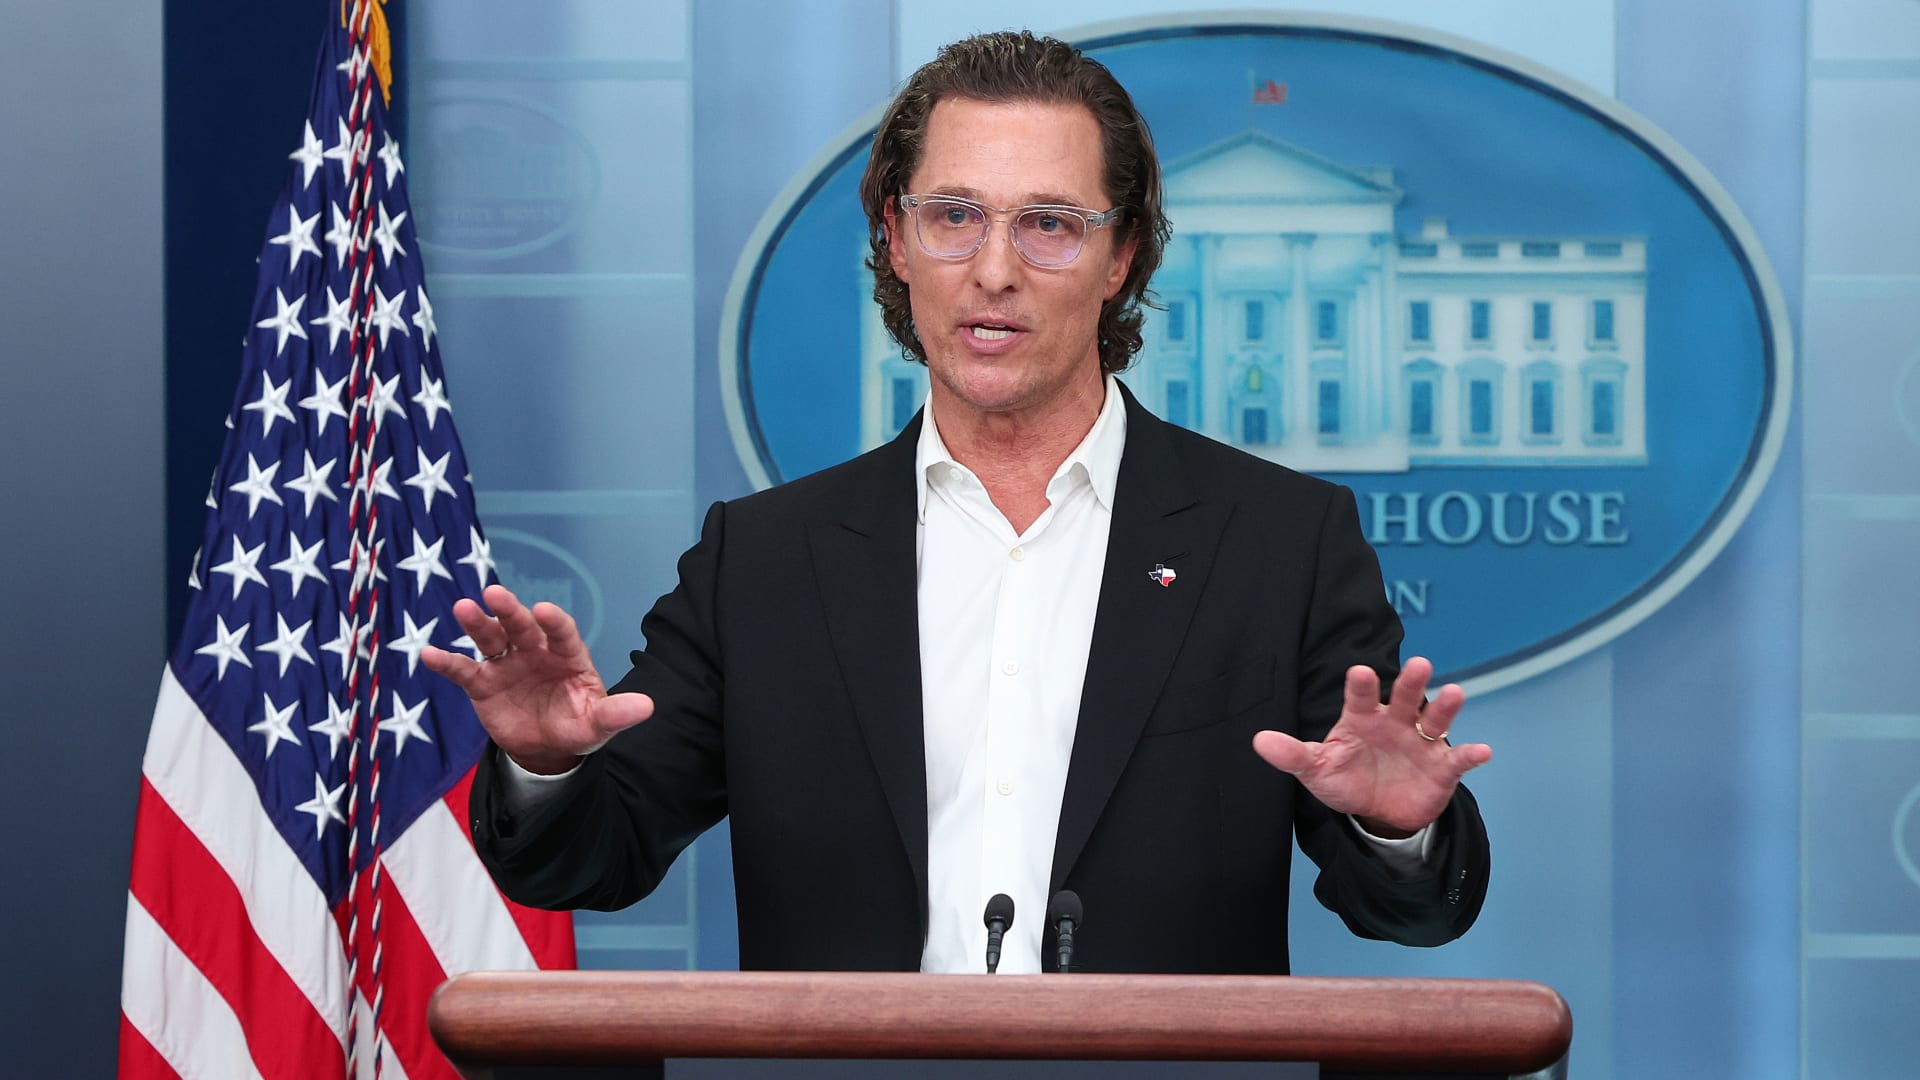 Matthew McConaughey expressed his support for gun control legislation at the White House on June 07, 2022.